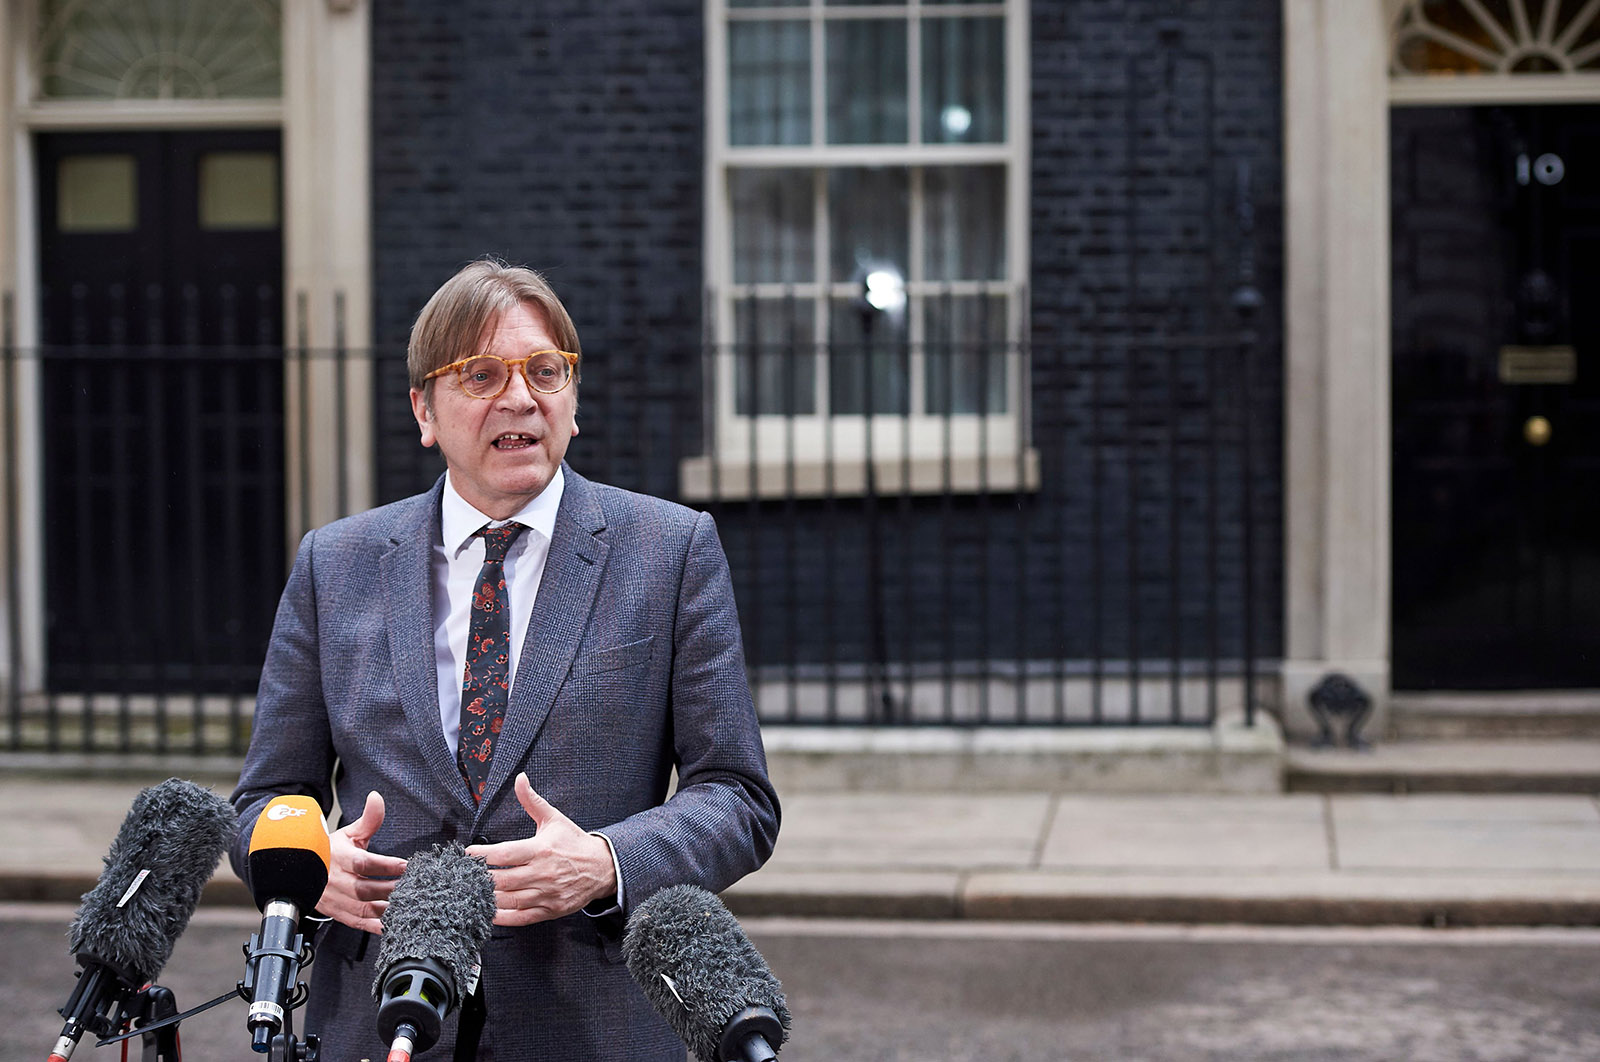 Guy Verhofstadt, the European Parliament’s Brexit coordinator, speaking to the press in Downing Street, London, March 6, 2018